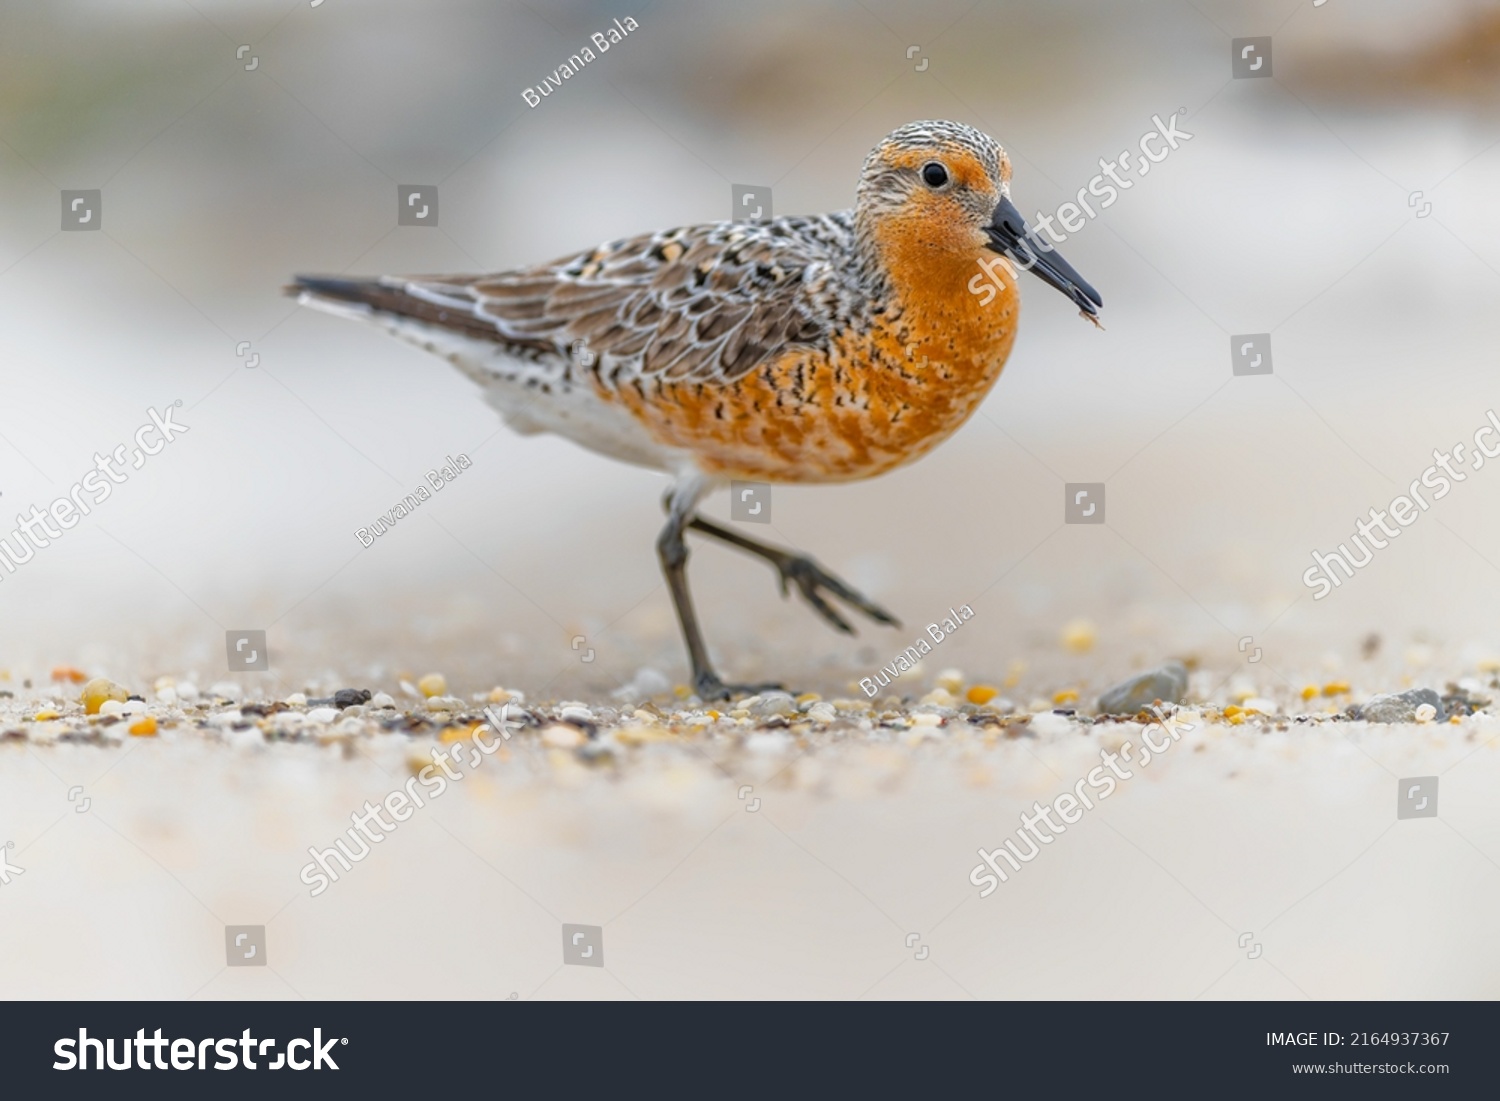 Red knot. Endangered species. One of the most endangered distinct populations of birds. Environment day, World Habitat and  wildlife day. Striking pose, scene on the shoreline. #2164937367